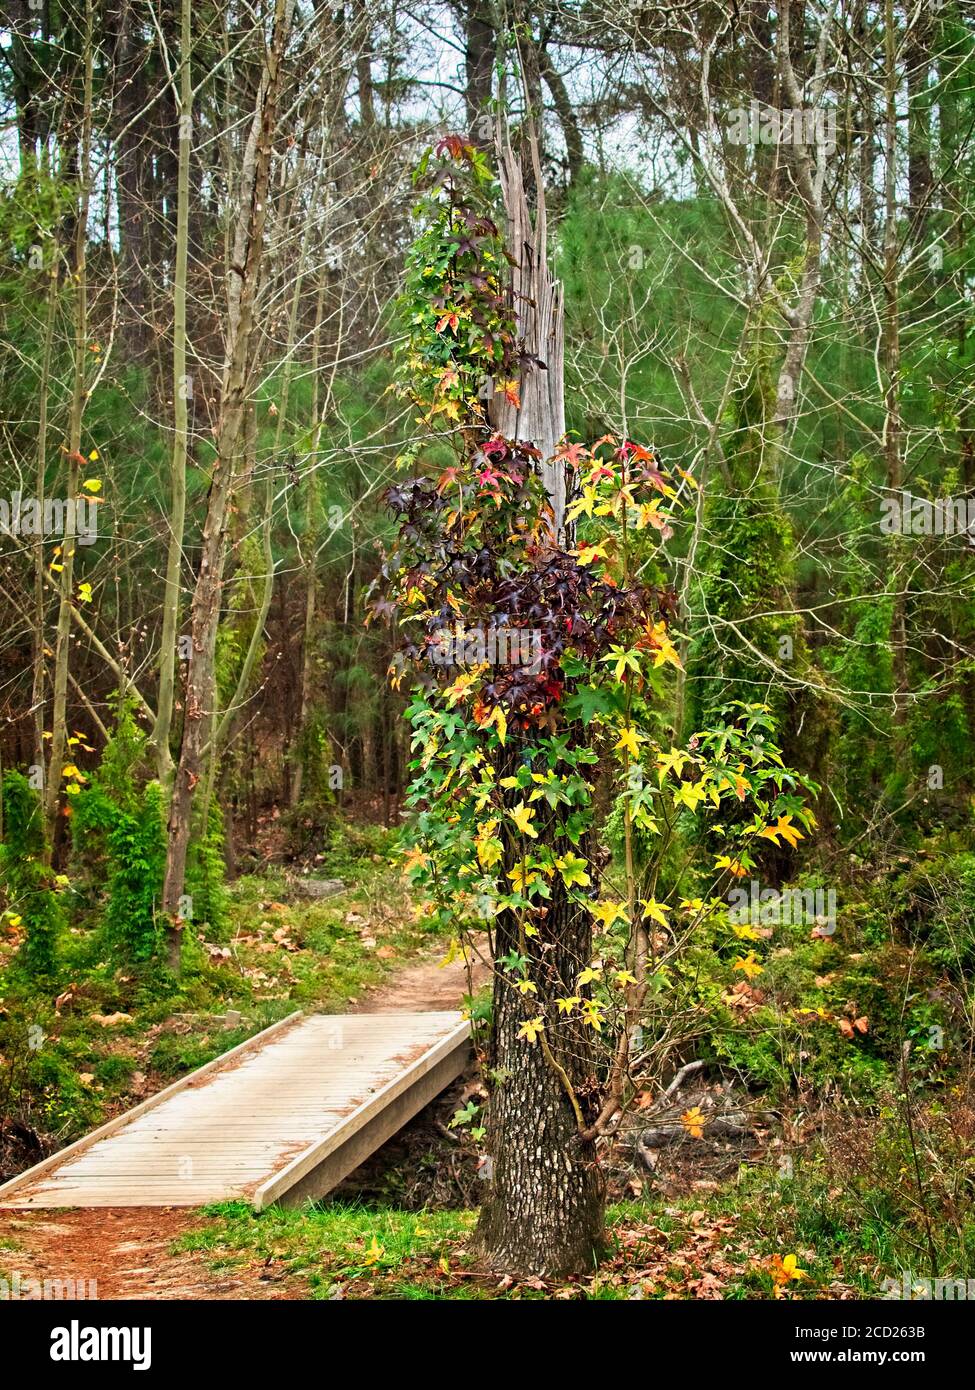 The Woodlands TX USA - 01-09-2020 - Holzbrücke in Von Tree in Woods Stockfoto